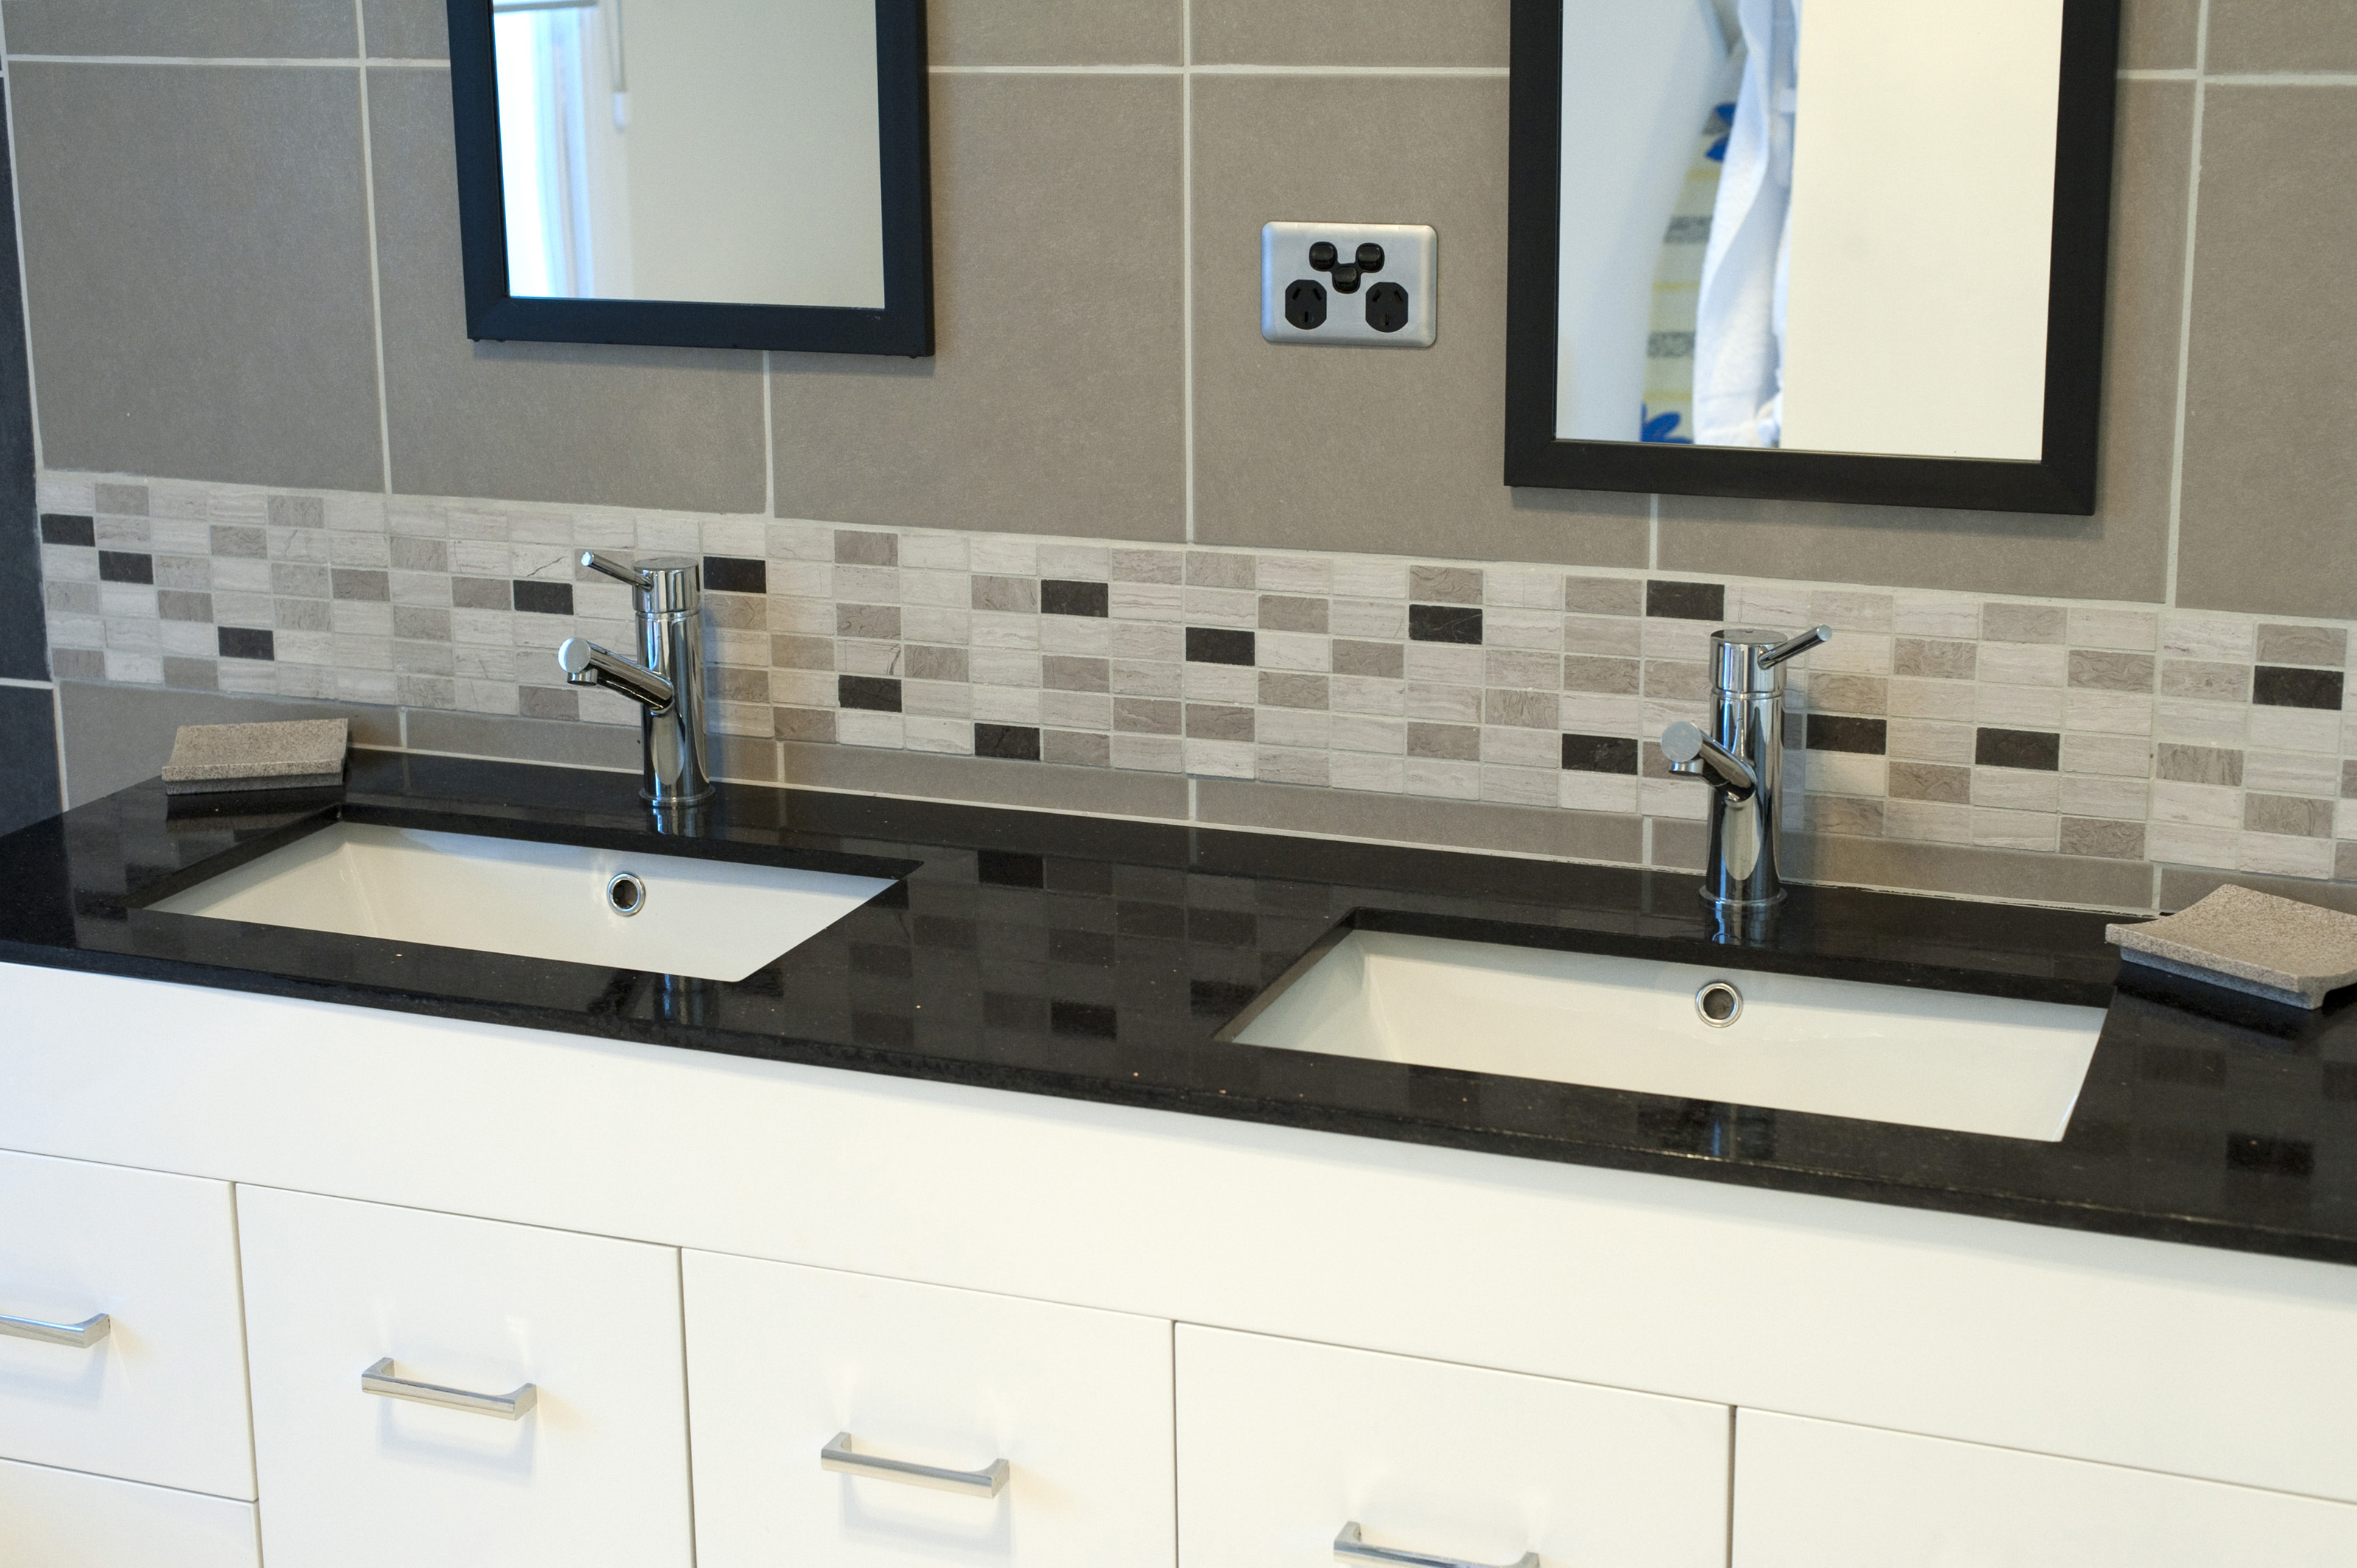 bathroom sinks used by manufa ctured houses